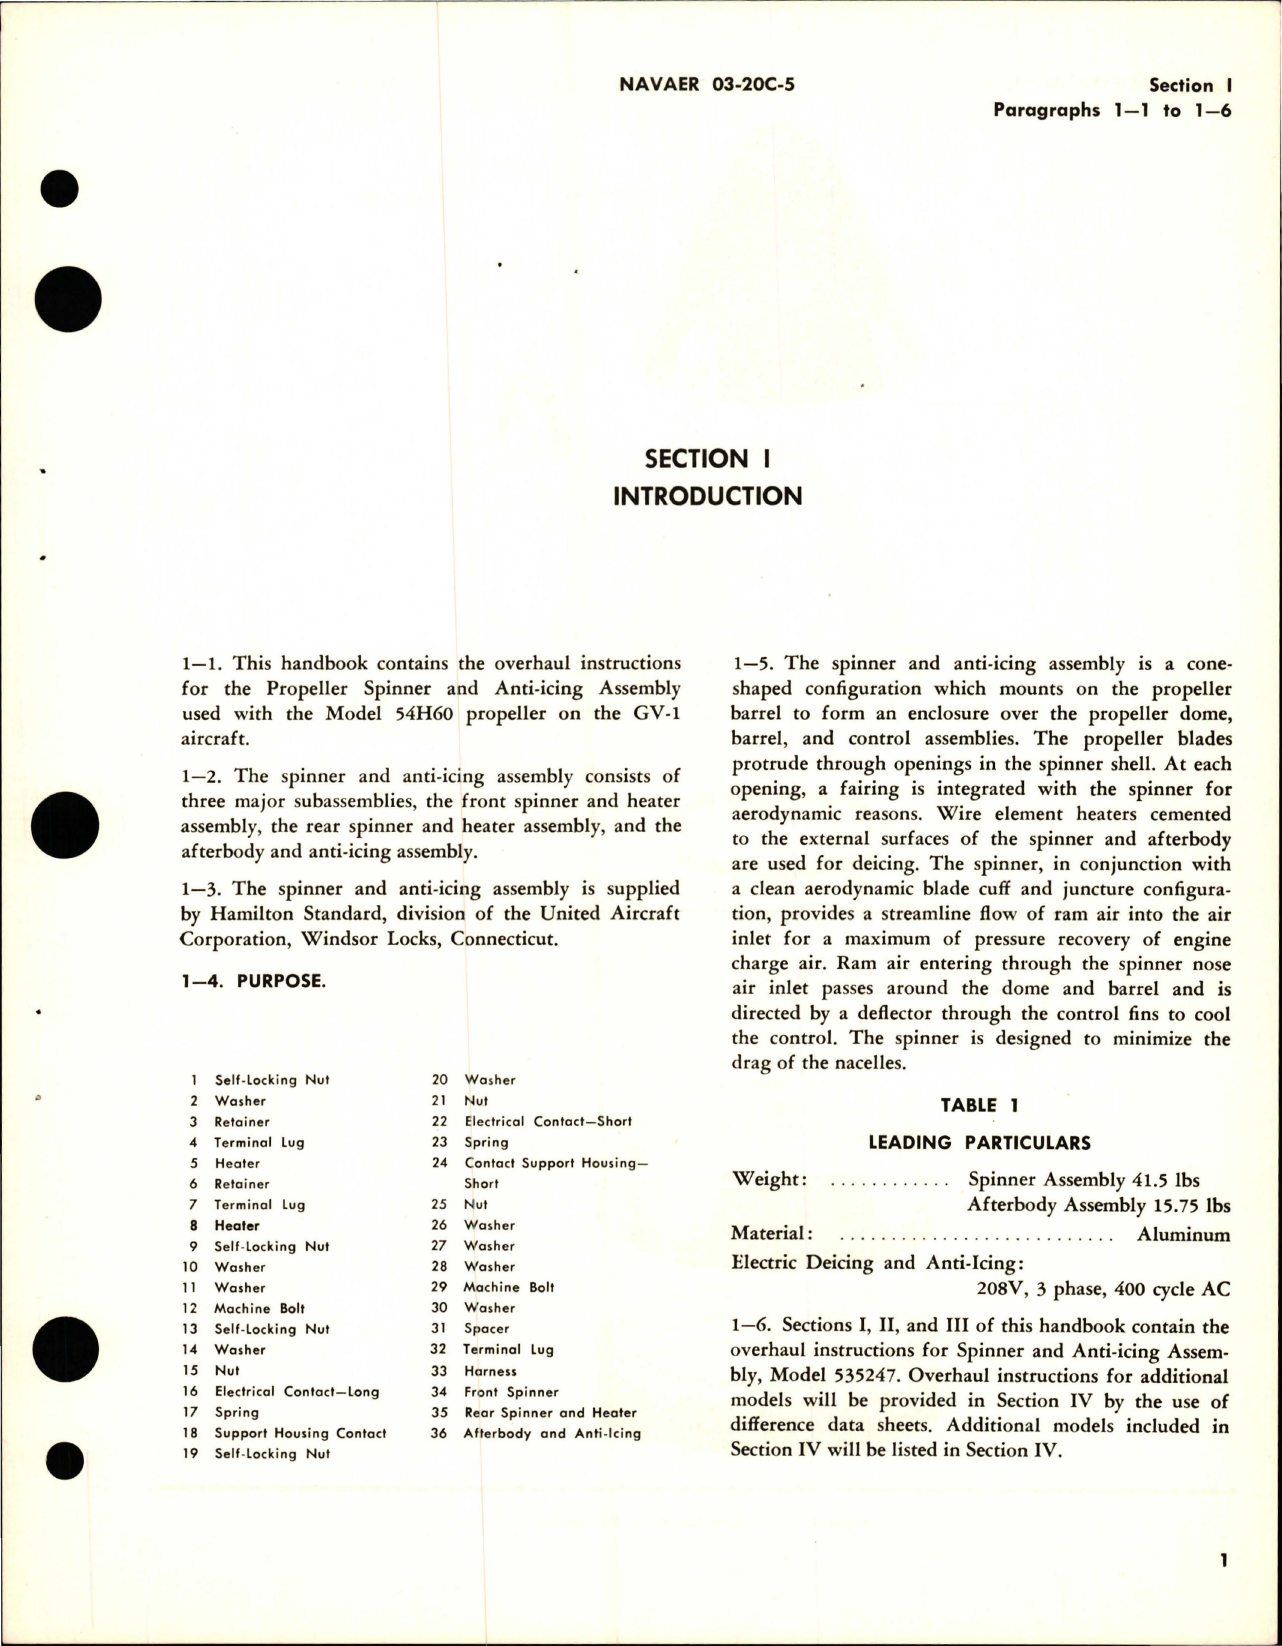 Sample page 5 from AirCorps Library document: Overhaul Instructions for Aircraft Propeller Spinner and Anti-Icing - Assembly No. 535247 